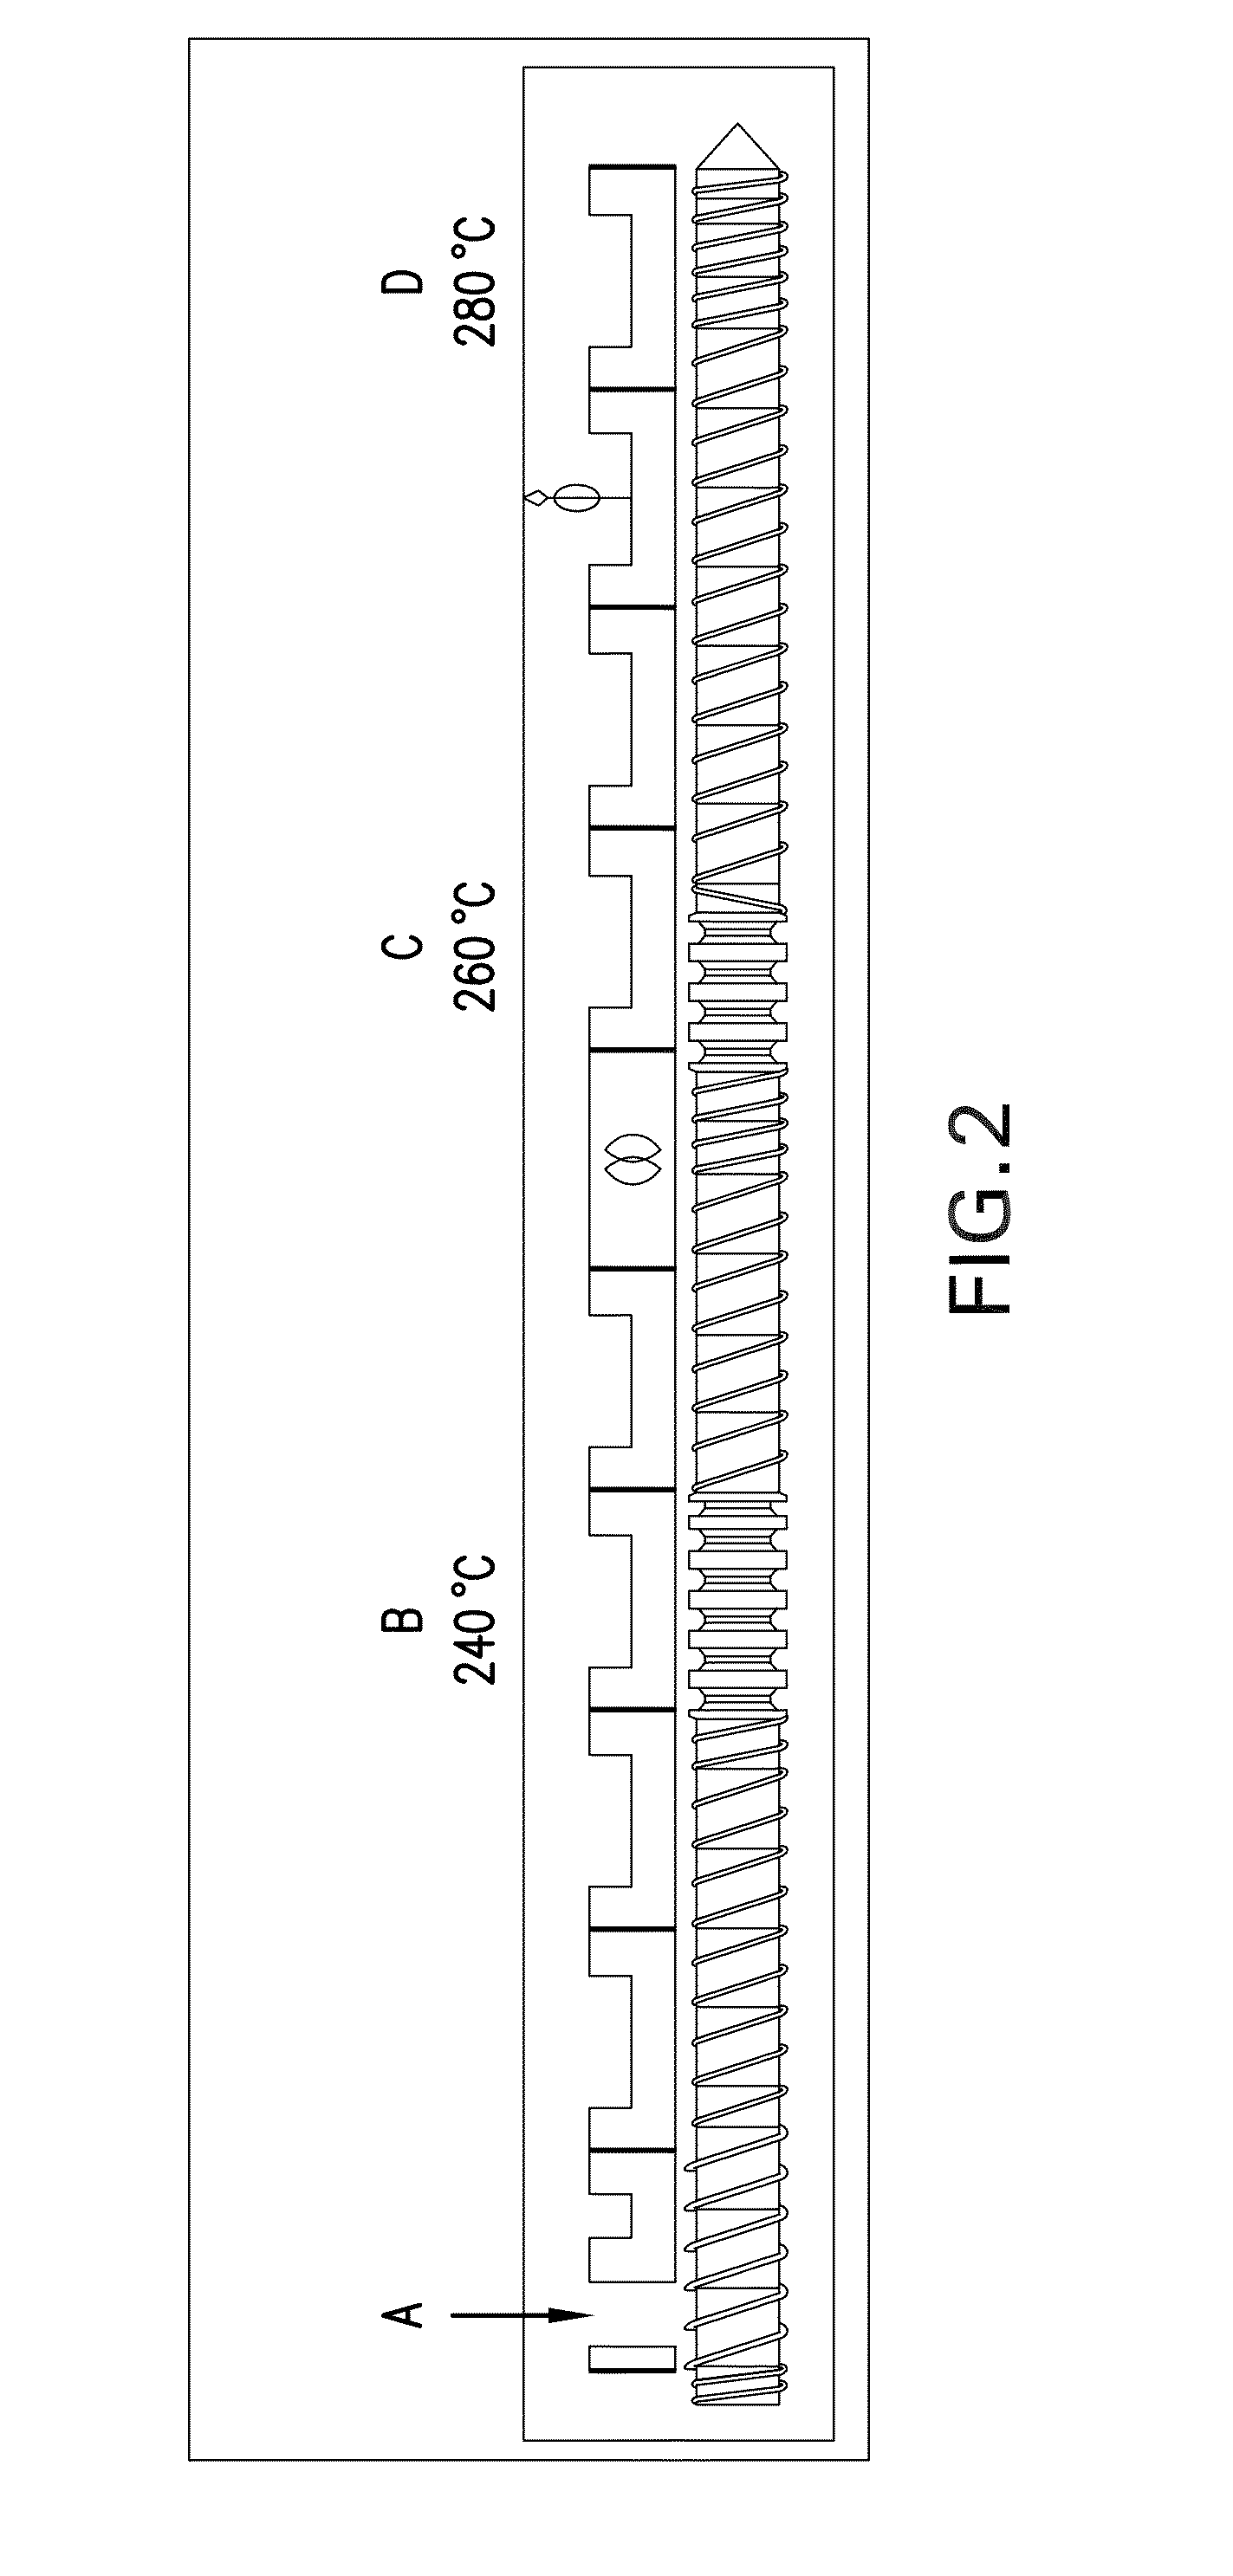 Thermoplastic compositions for laser direct structuring and methods for the manufacture and use thereof